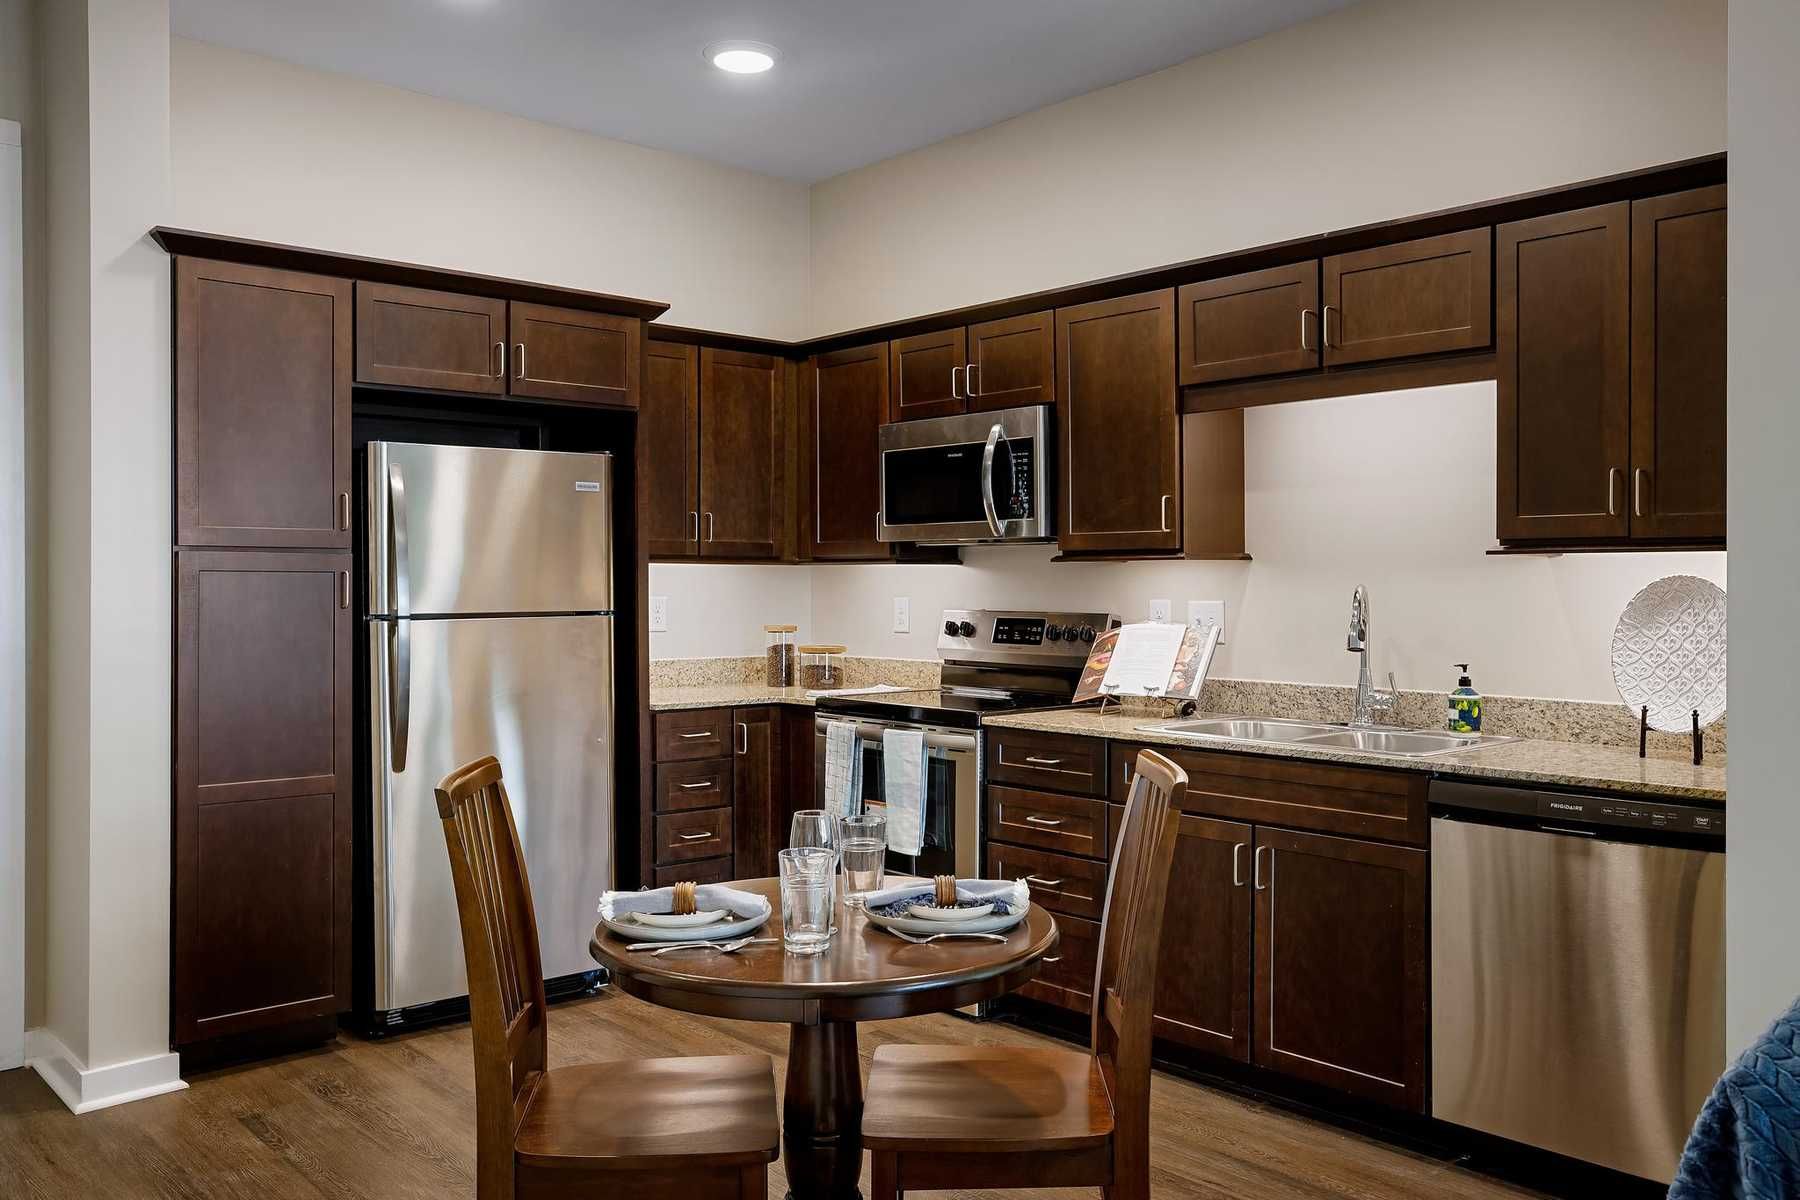 The Claiborne at Newnan Lakes senior apartment full kitchen with high-end design and appliances